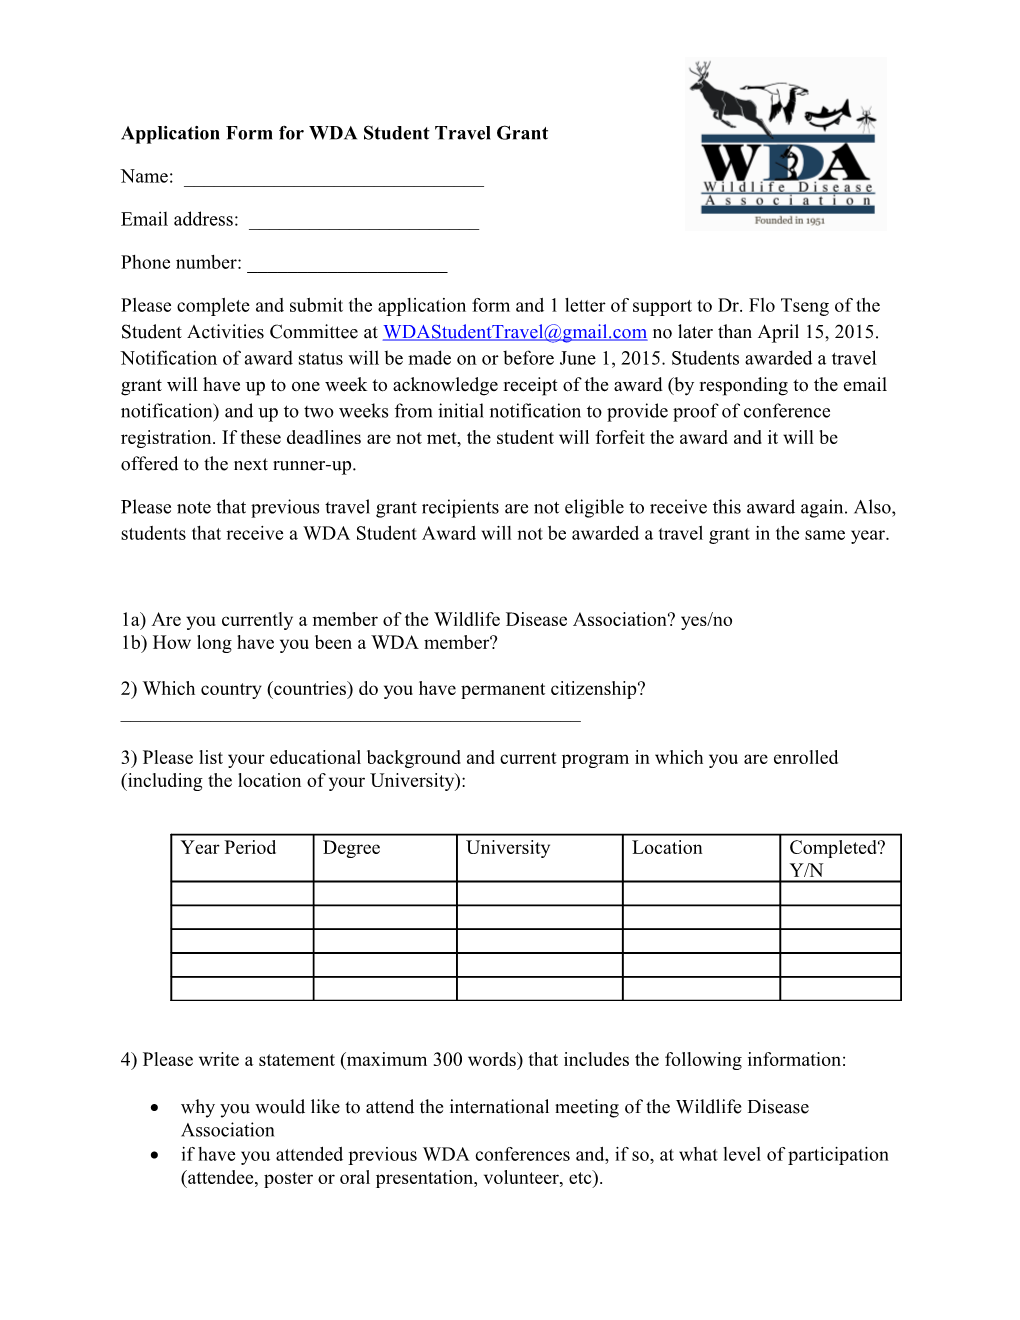 Application Form for WDA Student Travel Grant